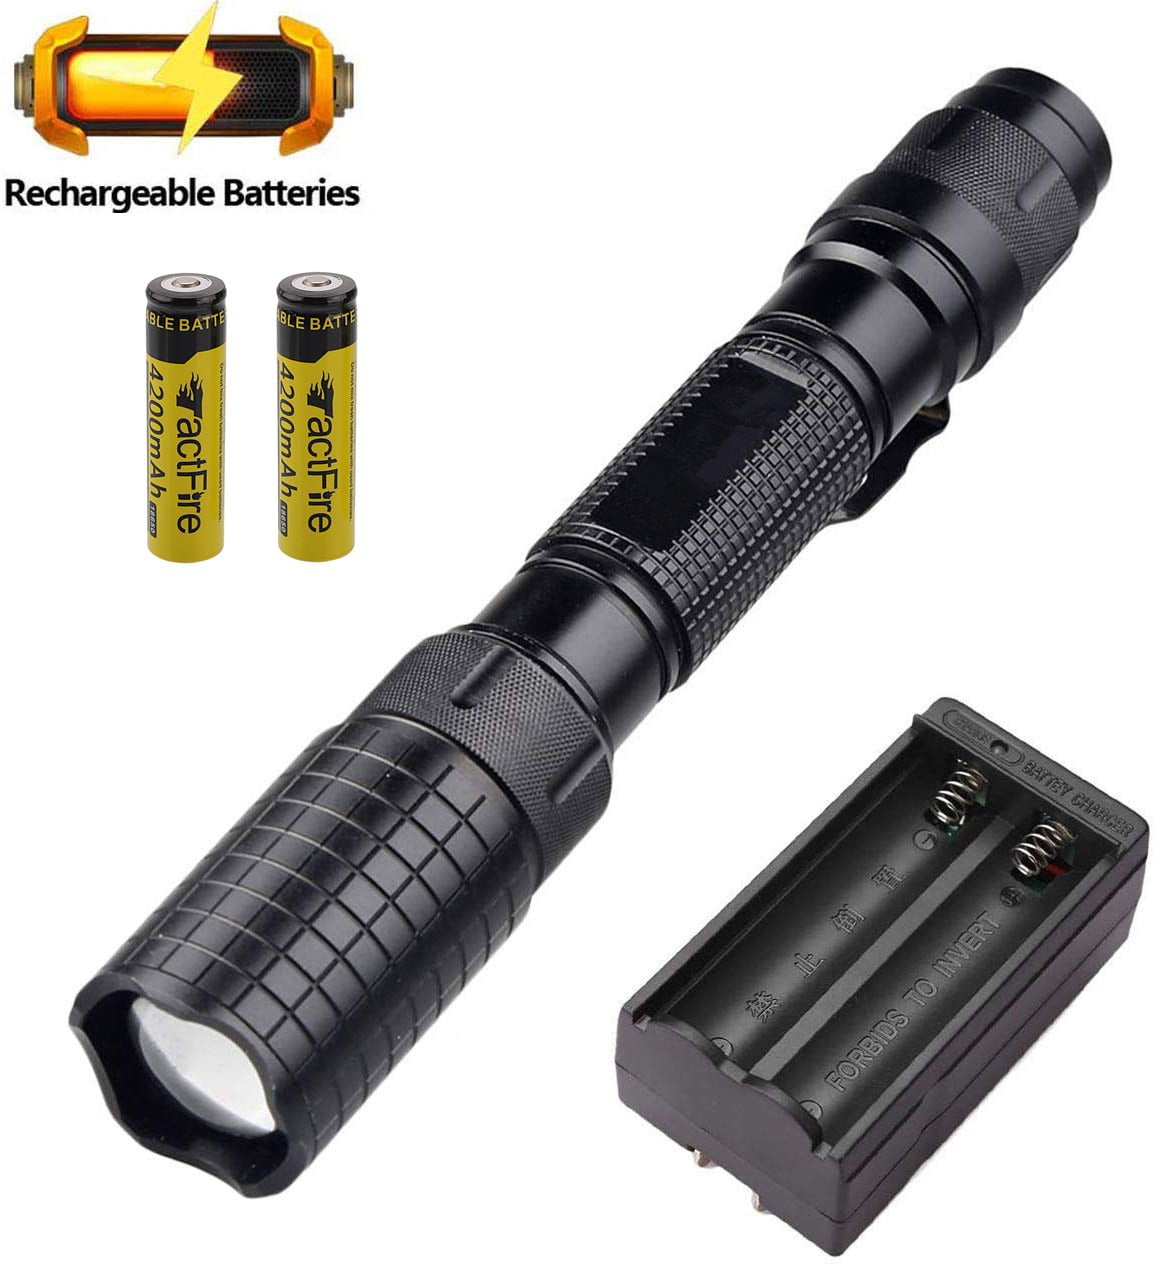 2Set Zoomable 90000LM T6 LED Torch Flashlight Lamp & Rechargeable BTY Charger 